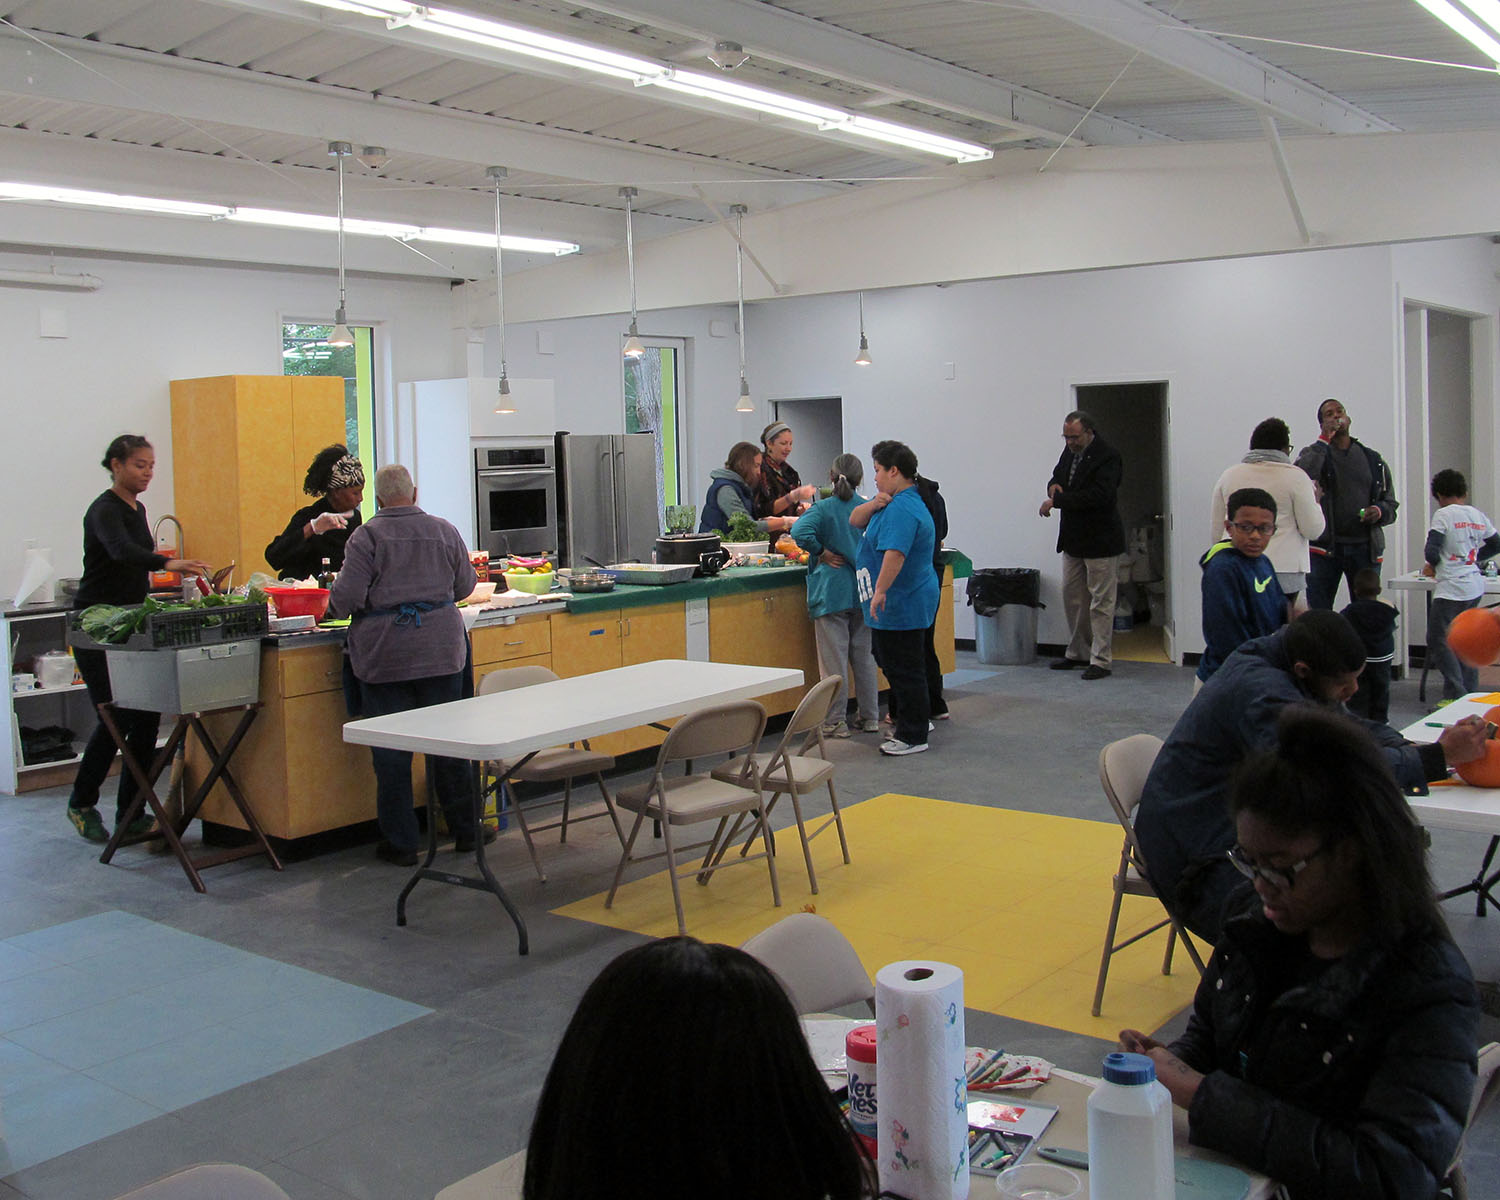 Neighbors enjoyed the space at this Green Food Fest on October 24.